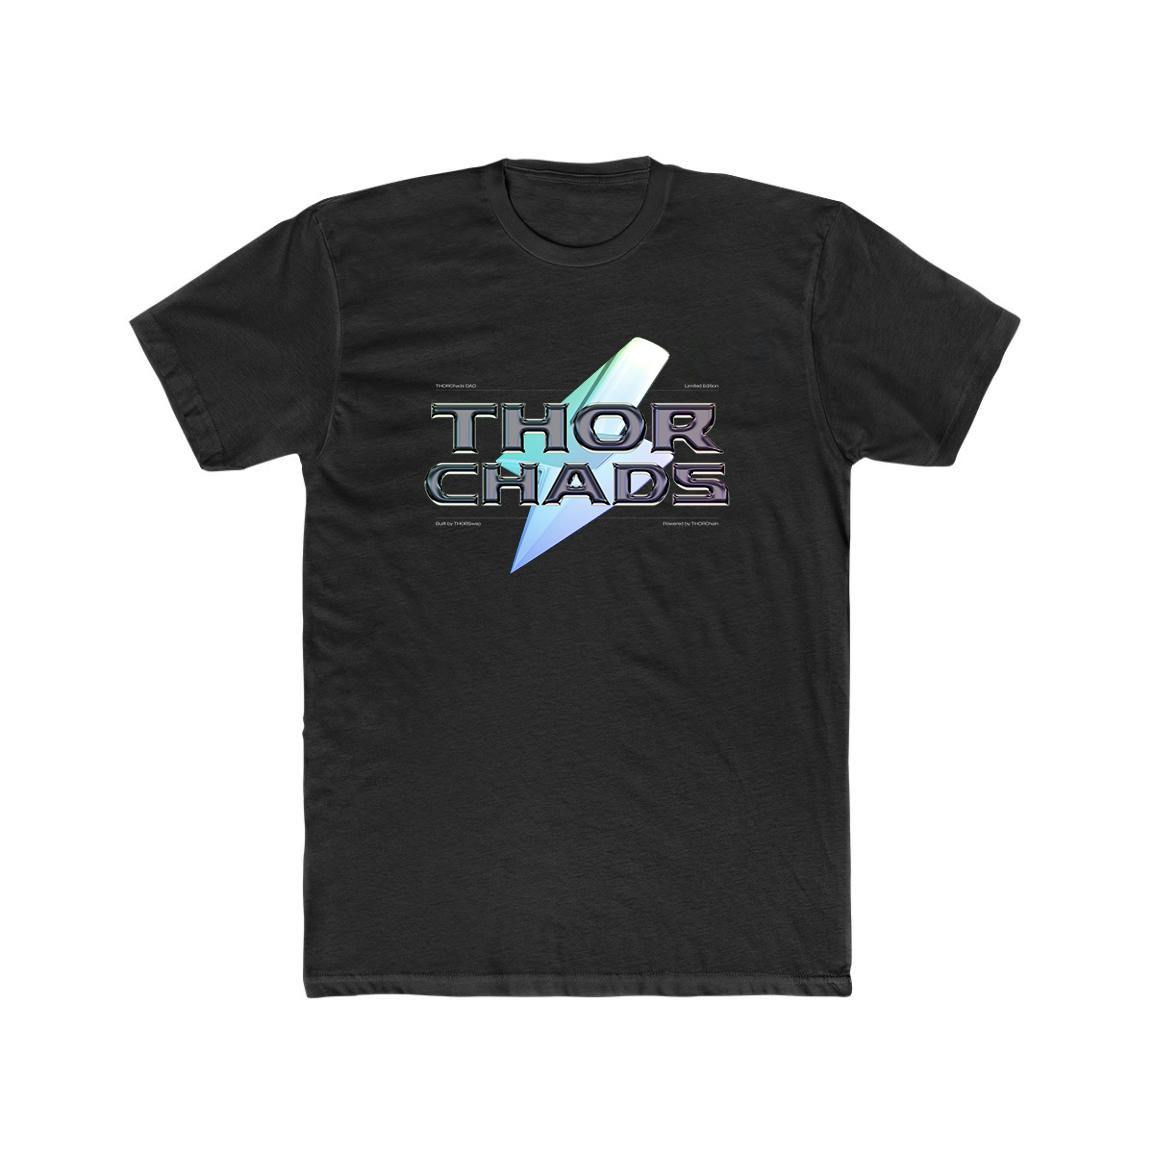 THORChads Tee (Edition of 100)